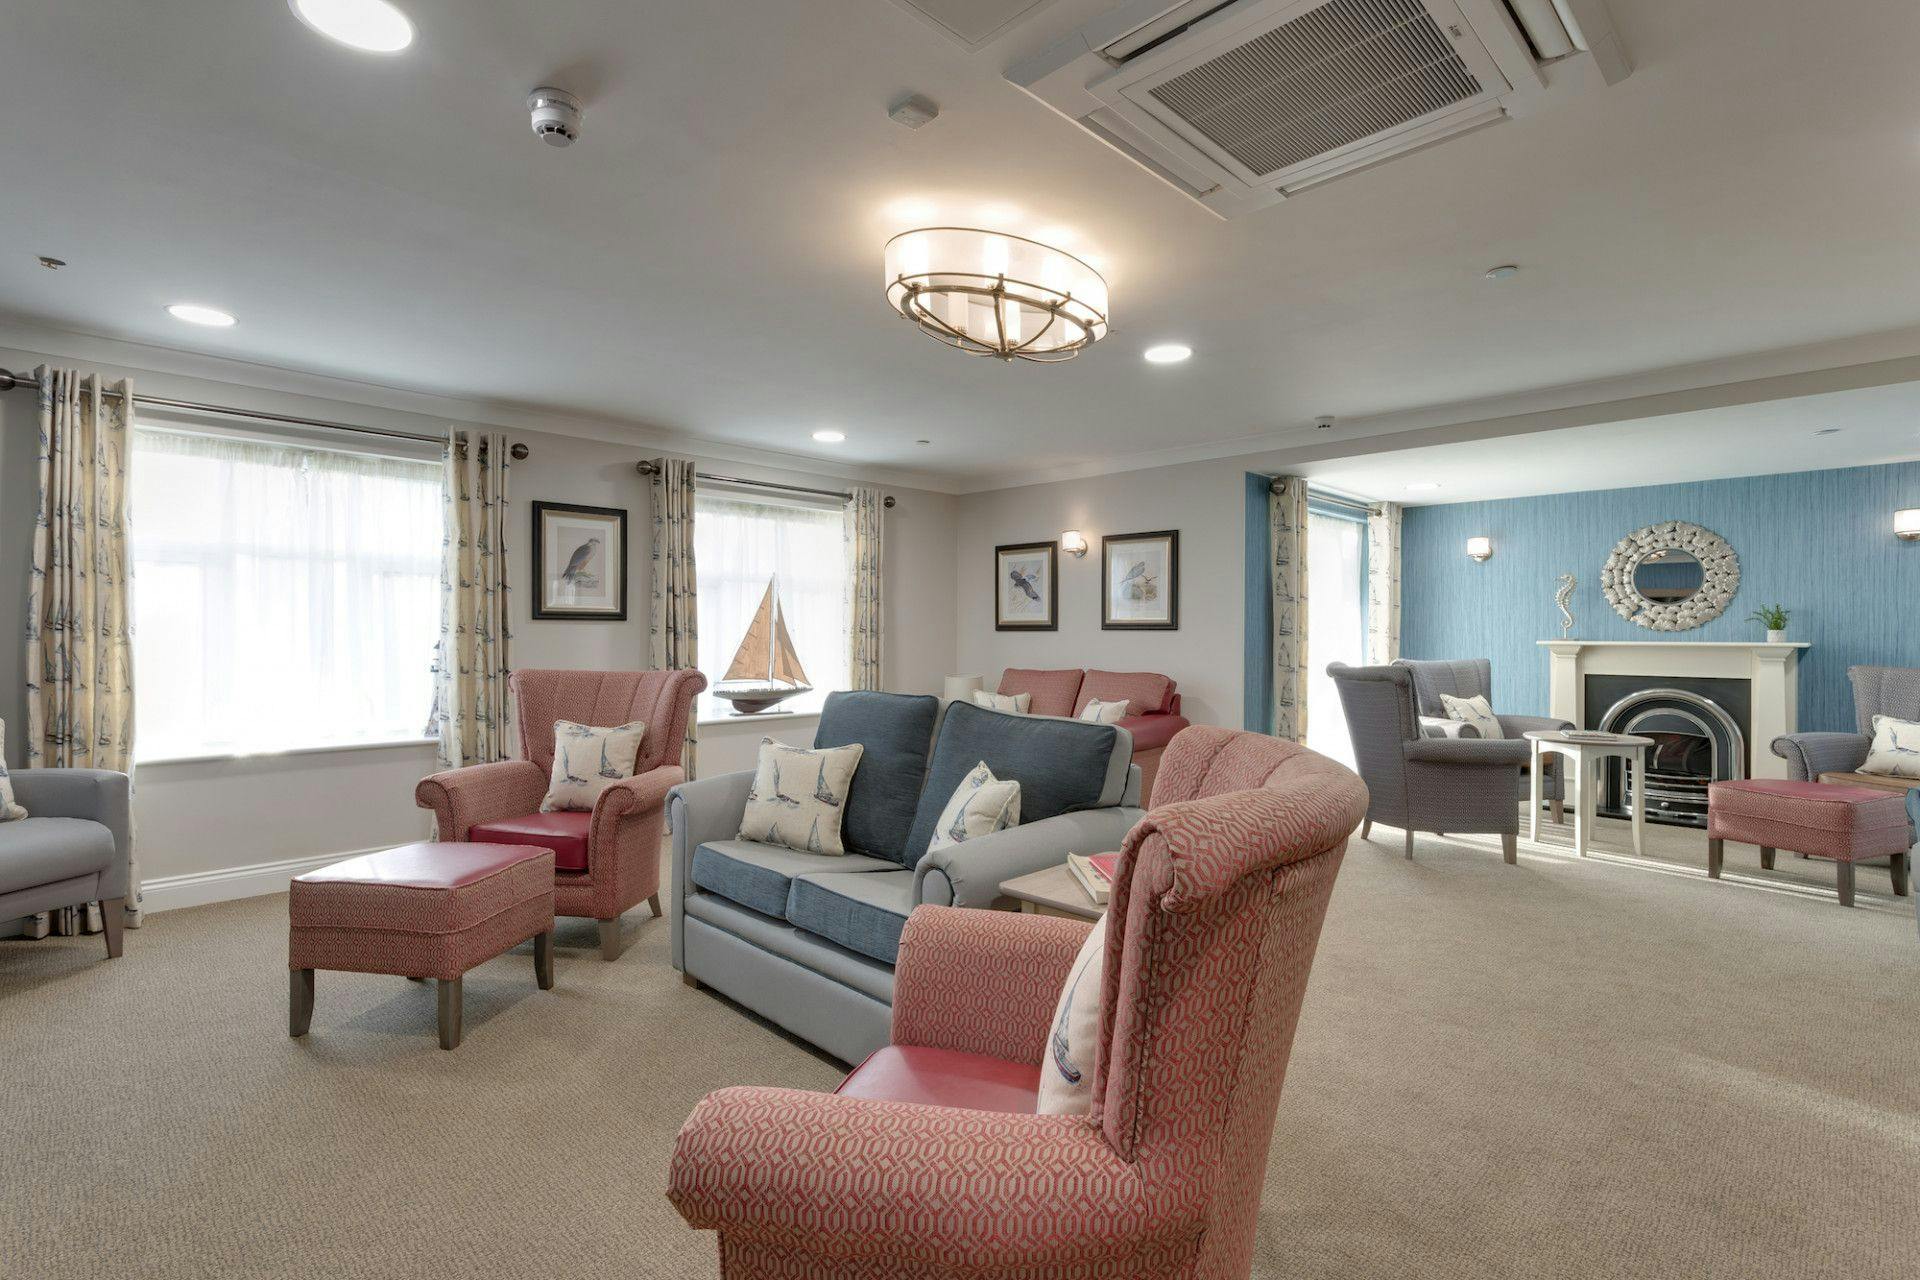 Care UK - Harrier Lodge care home 12